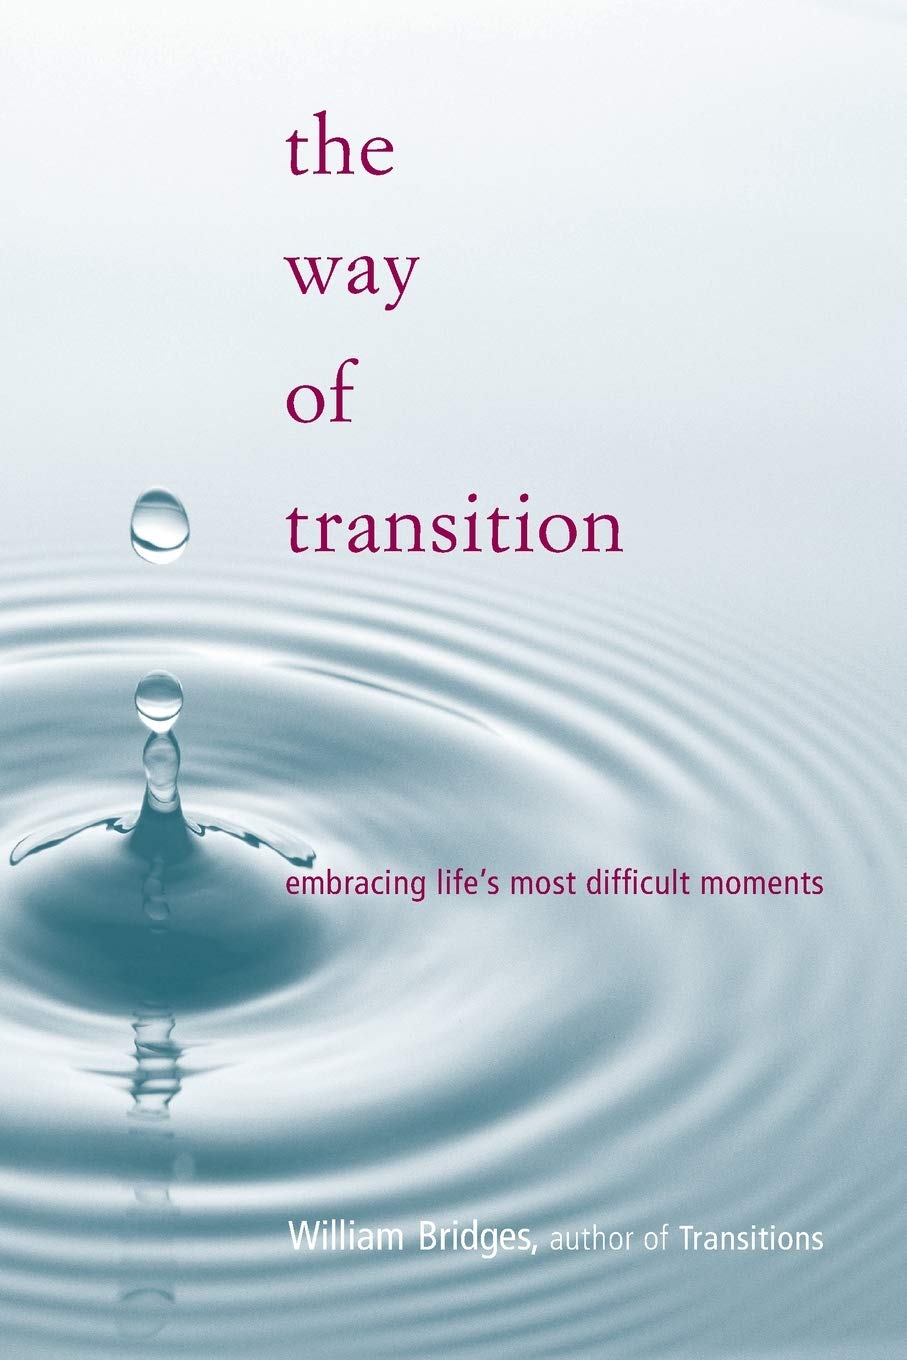 Image of the cover of The Way of Transition: Embracing Life’s Most Difficult Moments (Da Capo Lifelong Books, 2001) by William Bridges